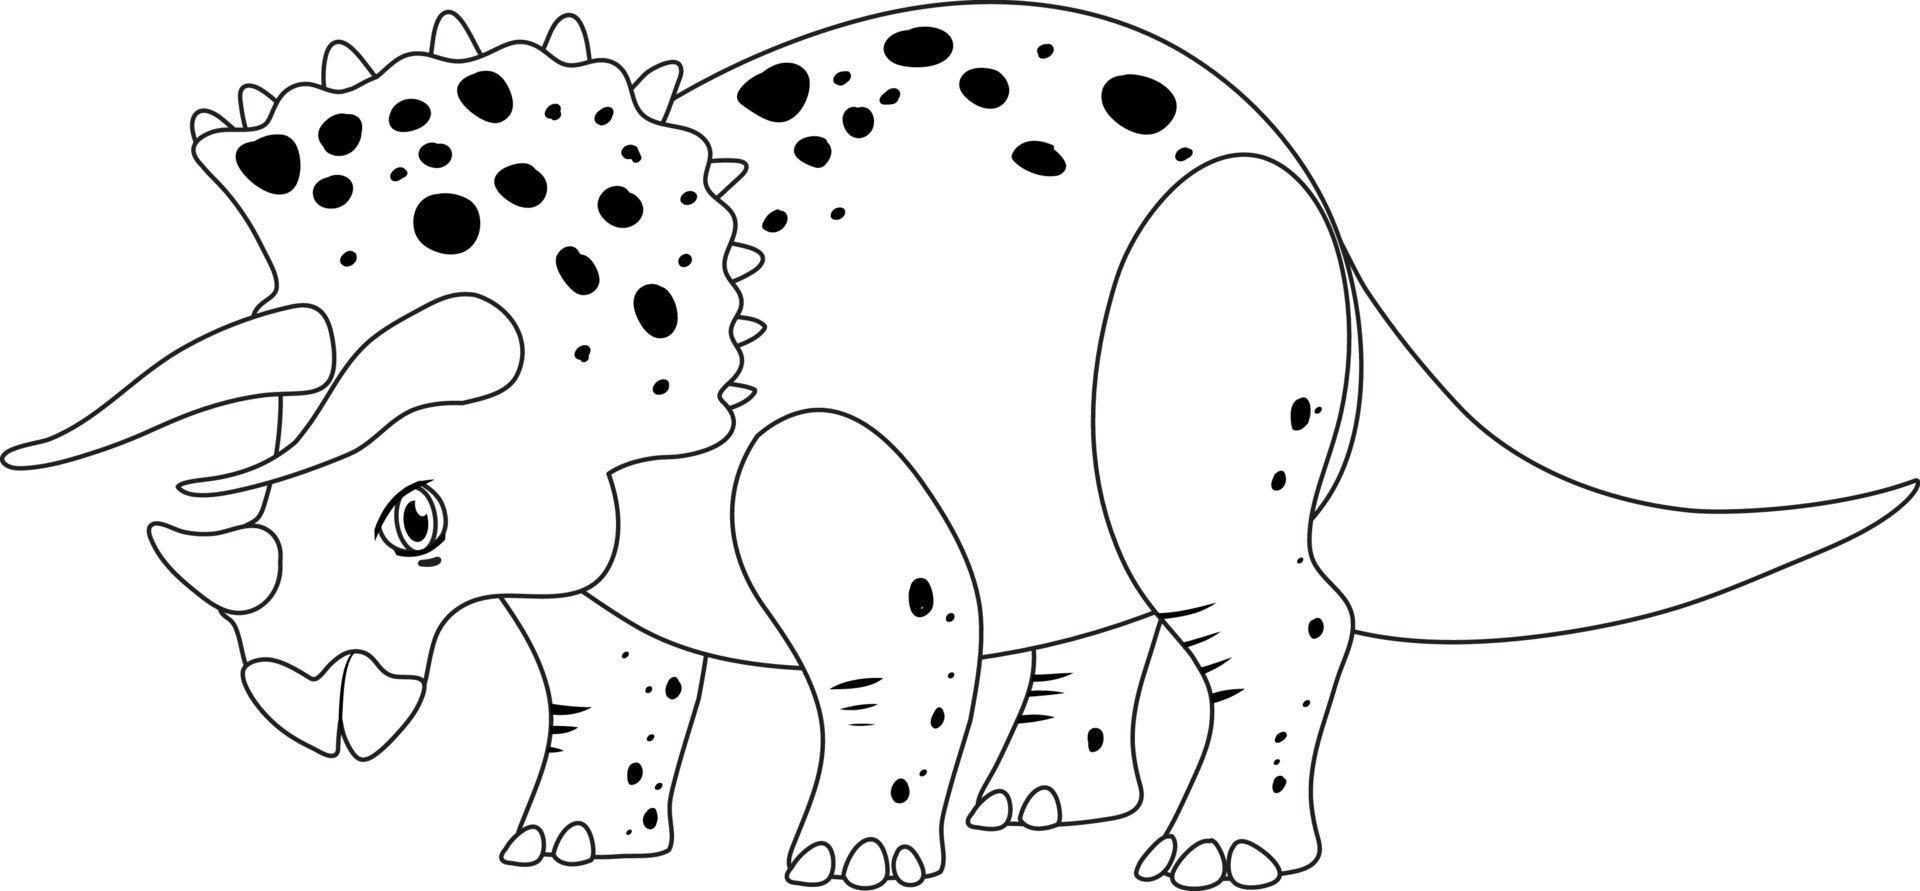 Triceratops dinosaur doodle outline on white background vector